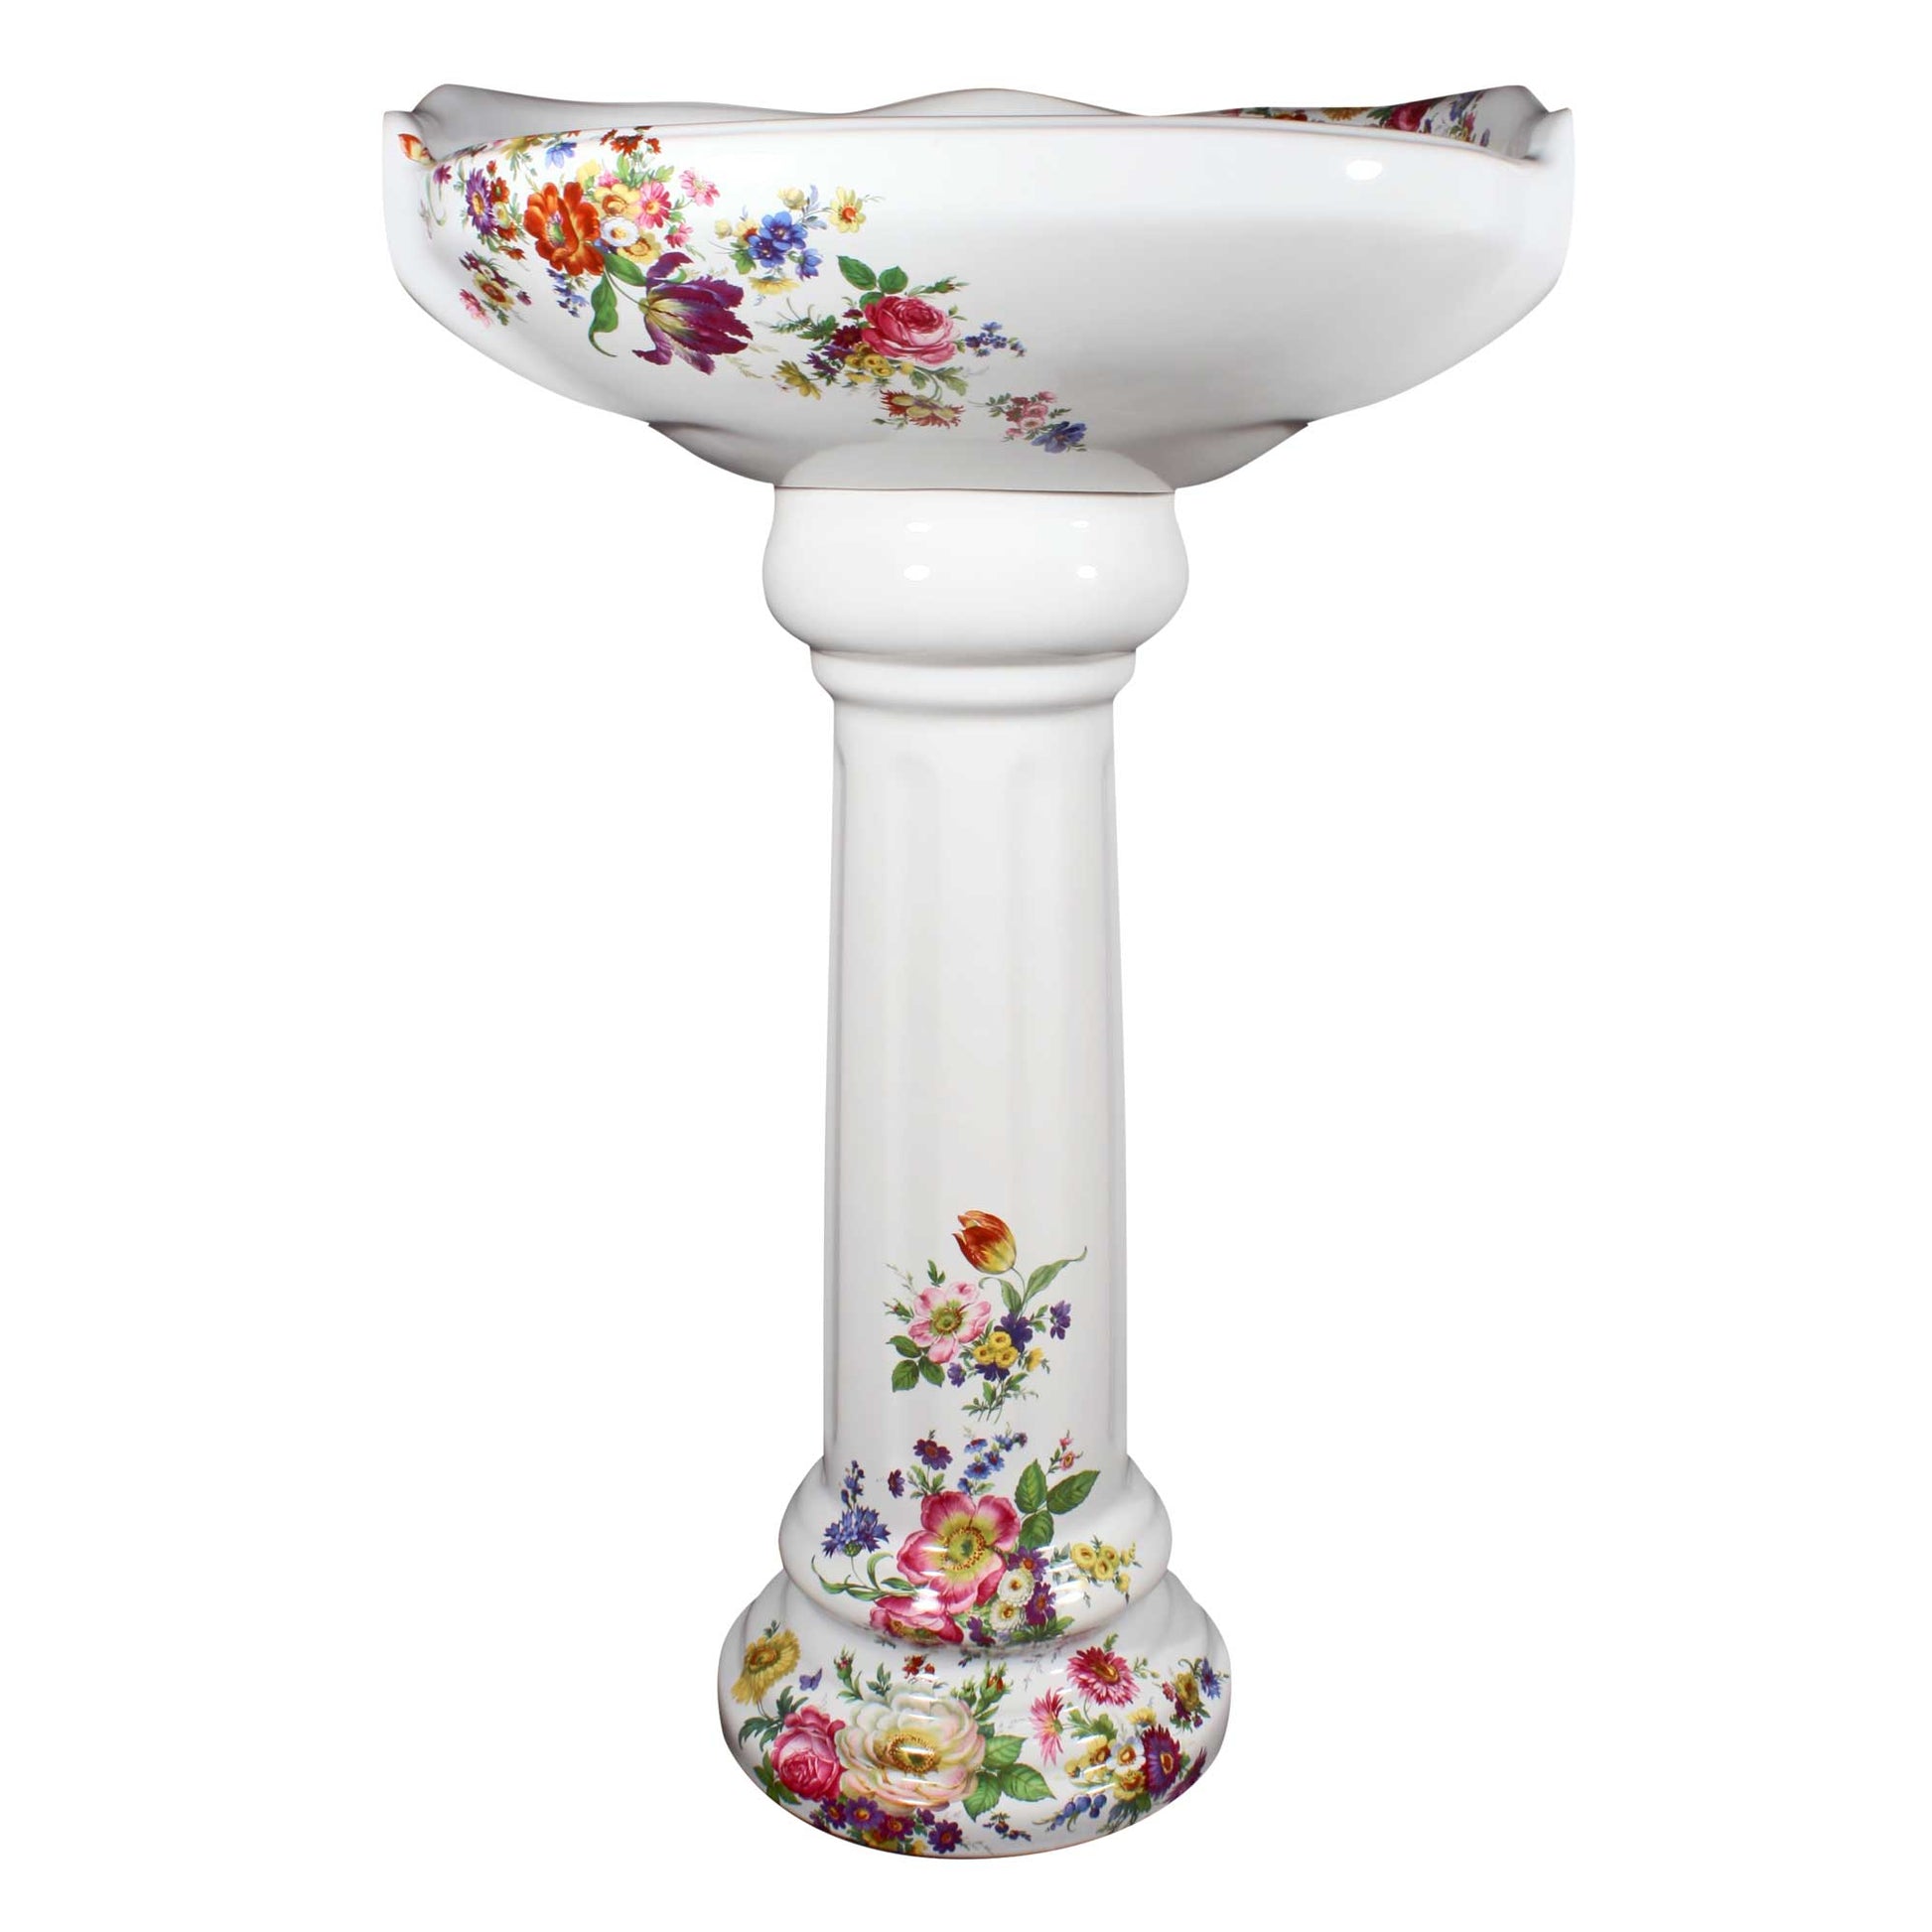 Front view of traditional pedestal lavatory painted with flowers